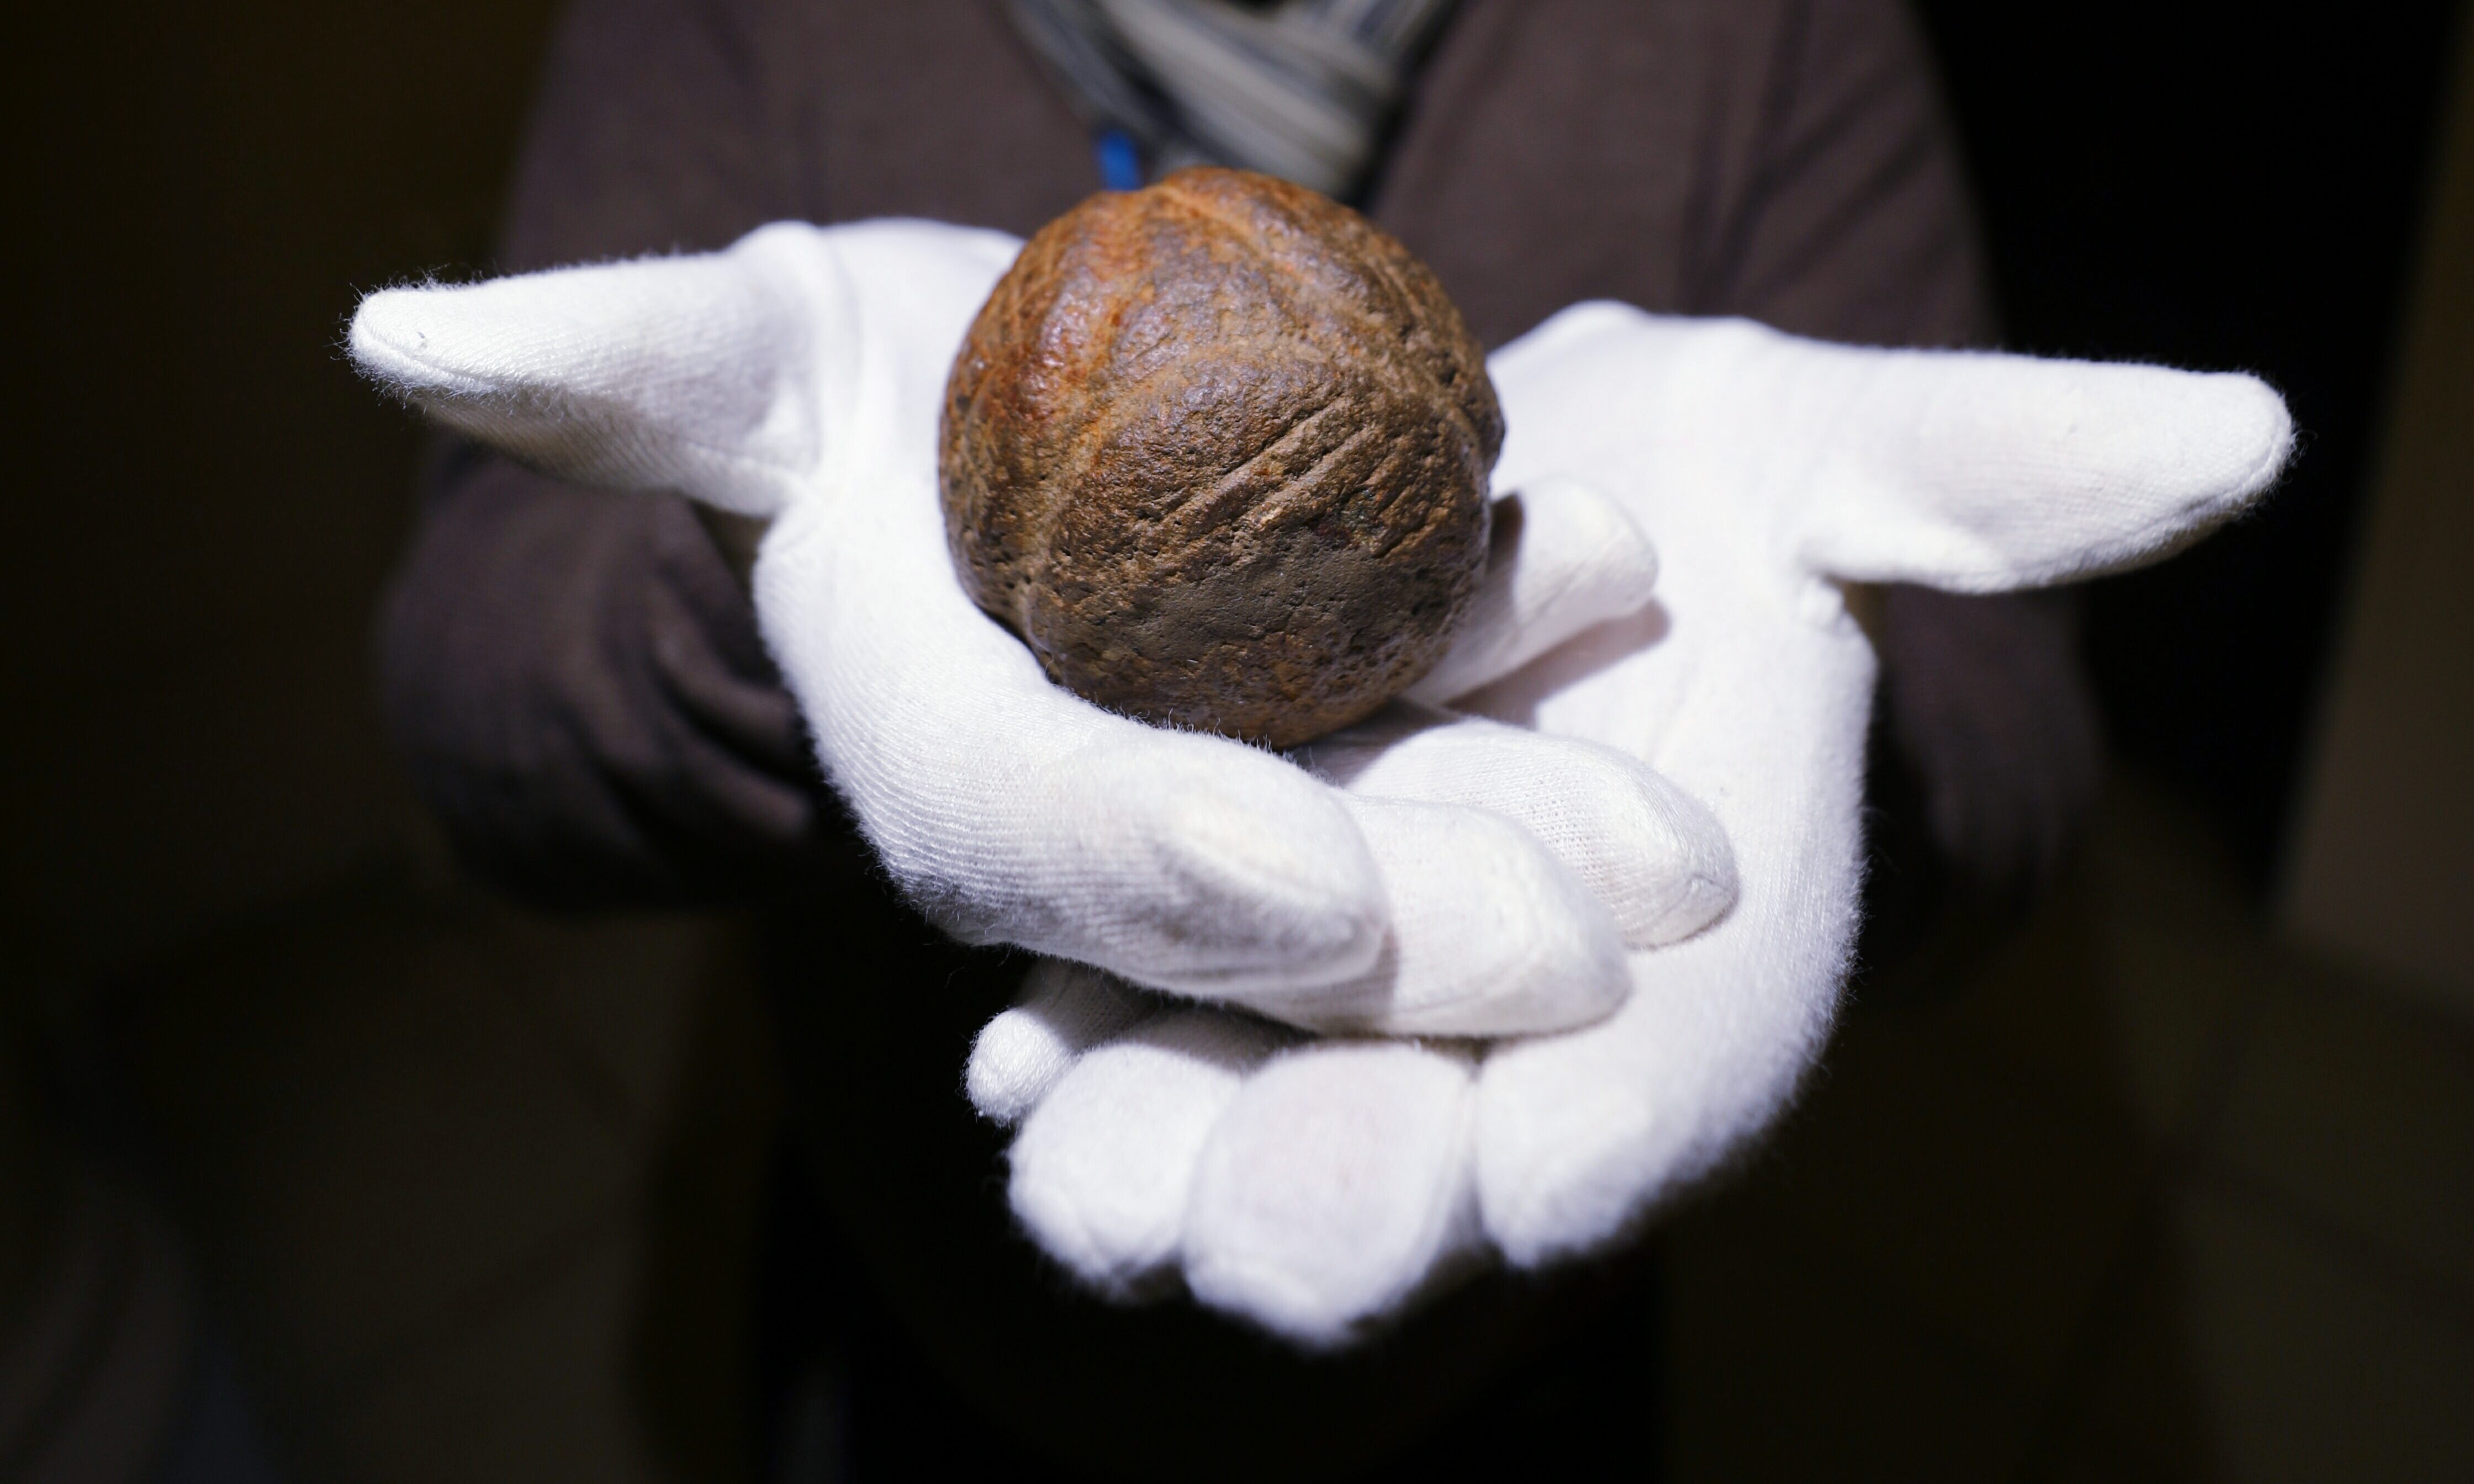 Collections officer Mark Hall with one of the Neolithic carved stone balls.